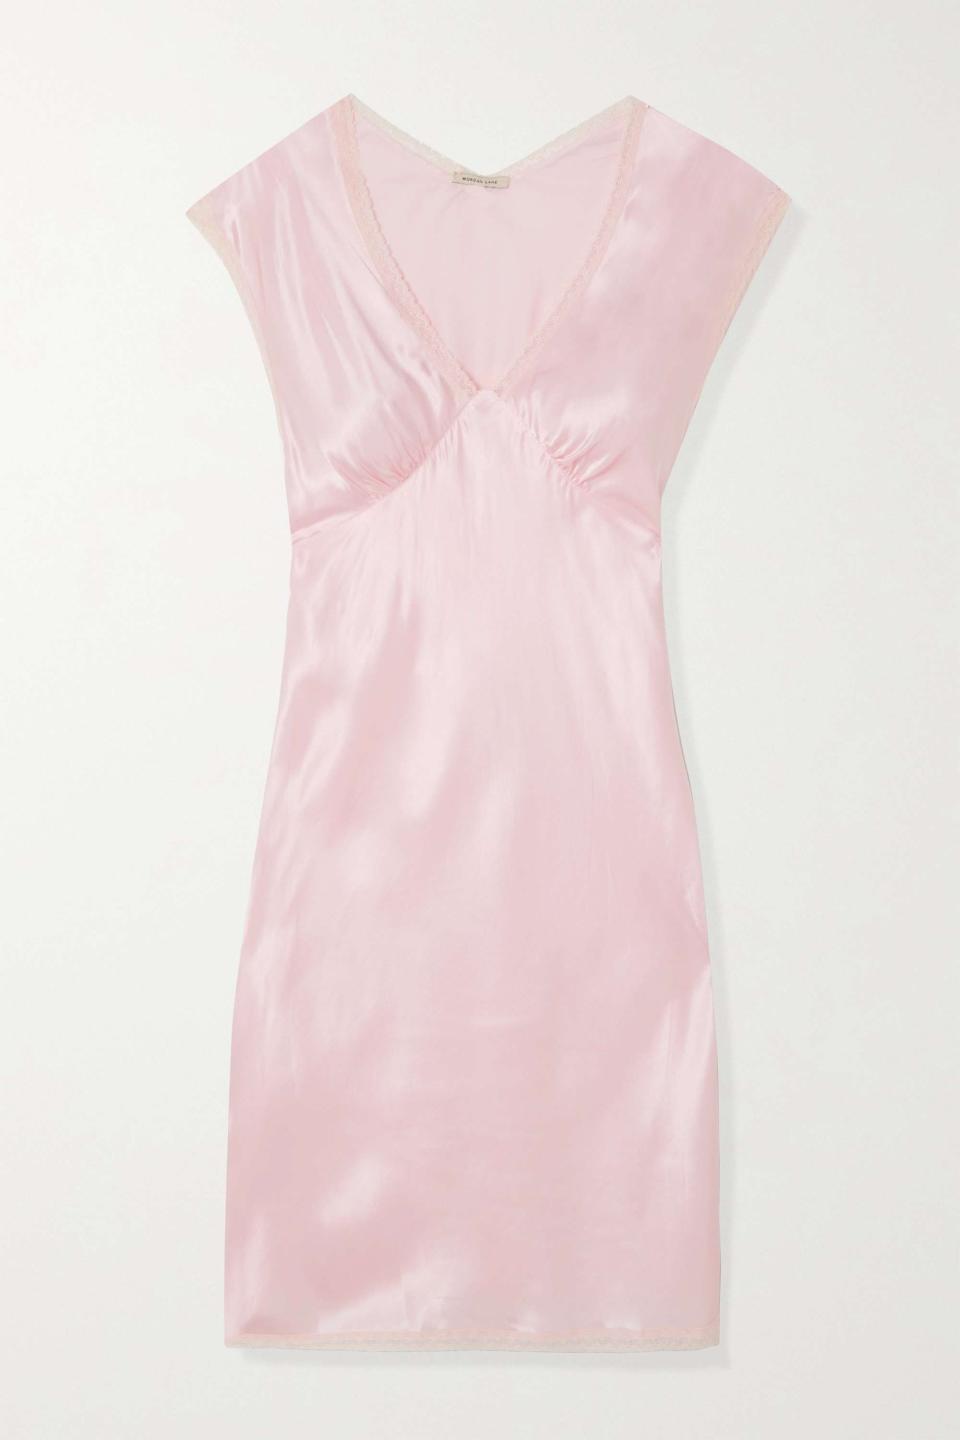 12) Cordelia Lace-Trimmed Satin Nightdress